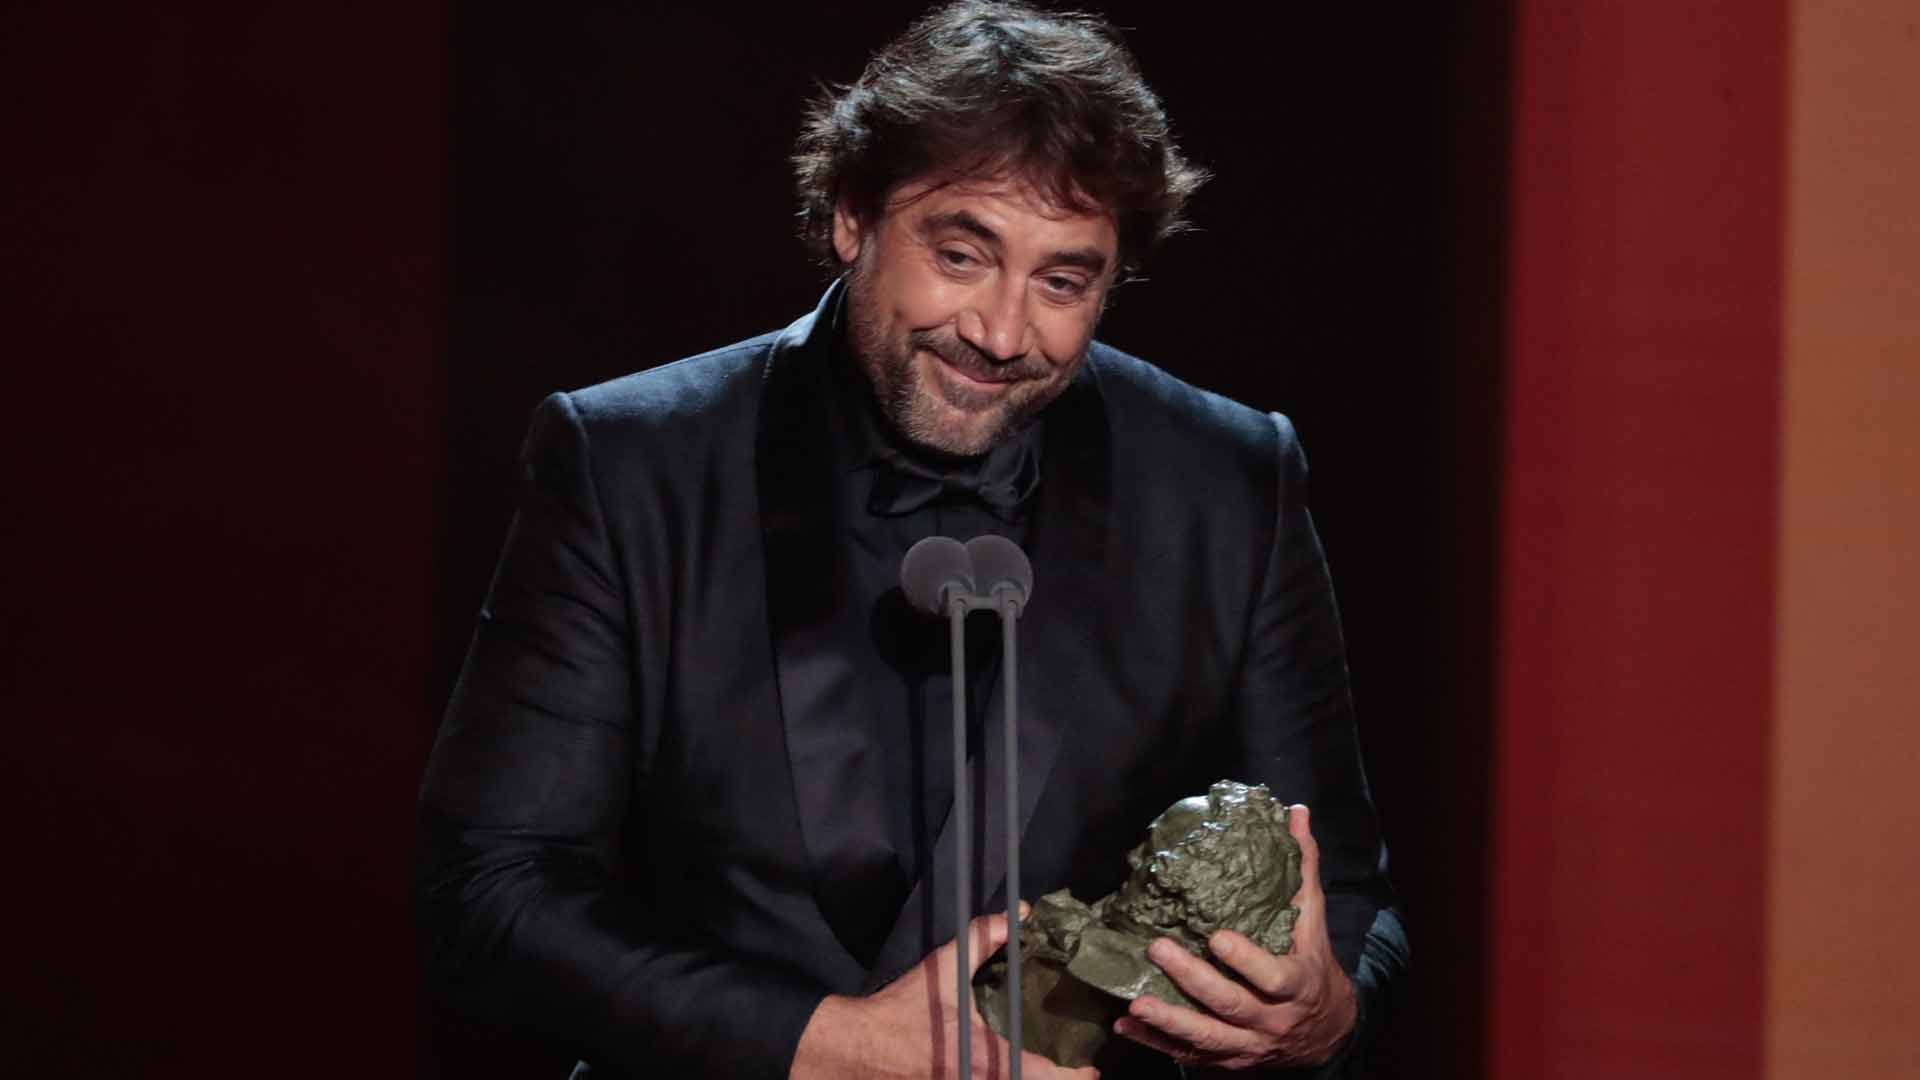 Actor Javier Bardem during the 36th annual Goya Film Awards in Valencia on Saturday 12 February, 2022.